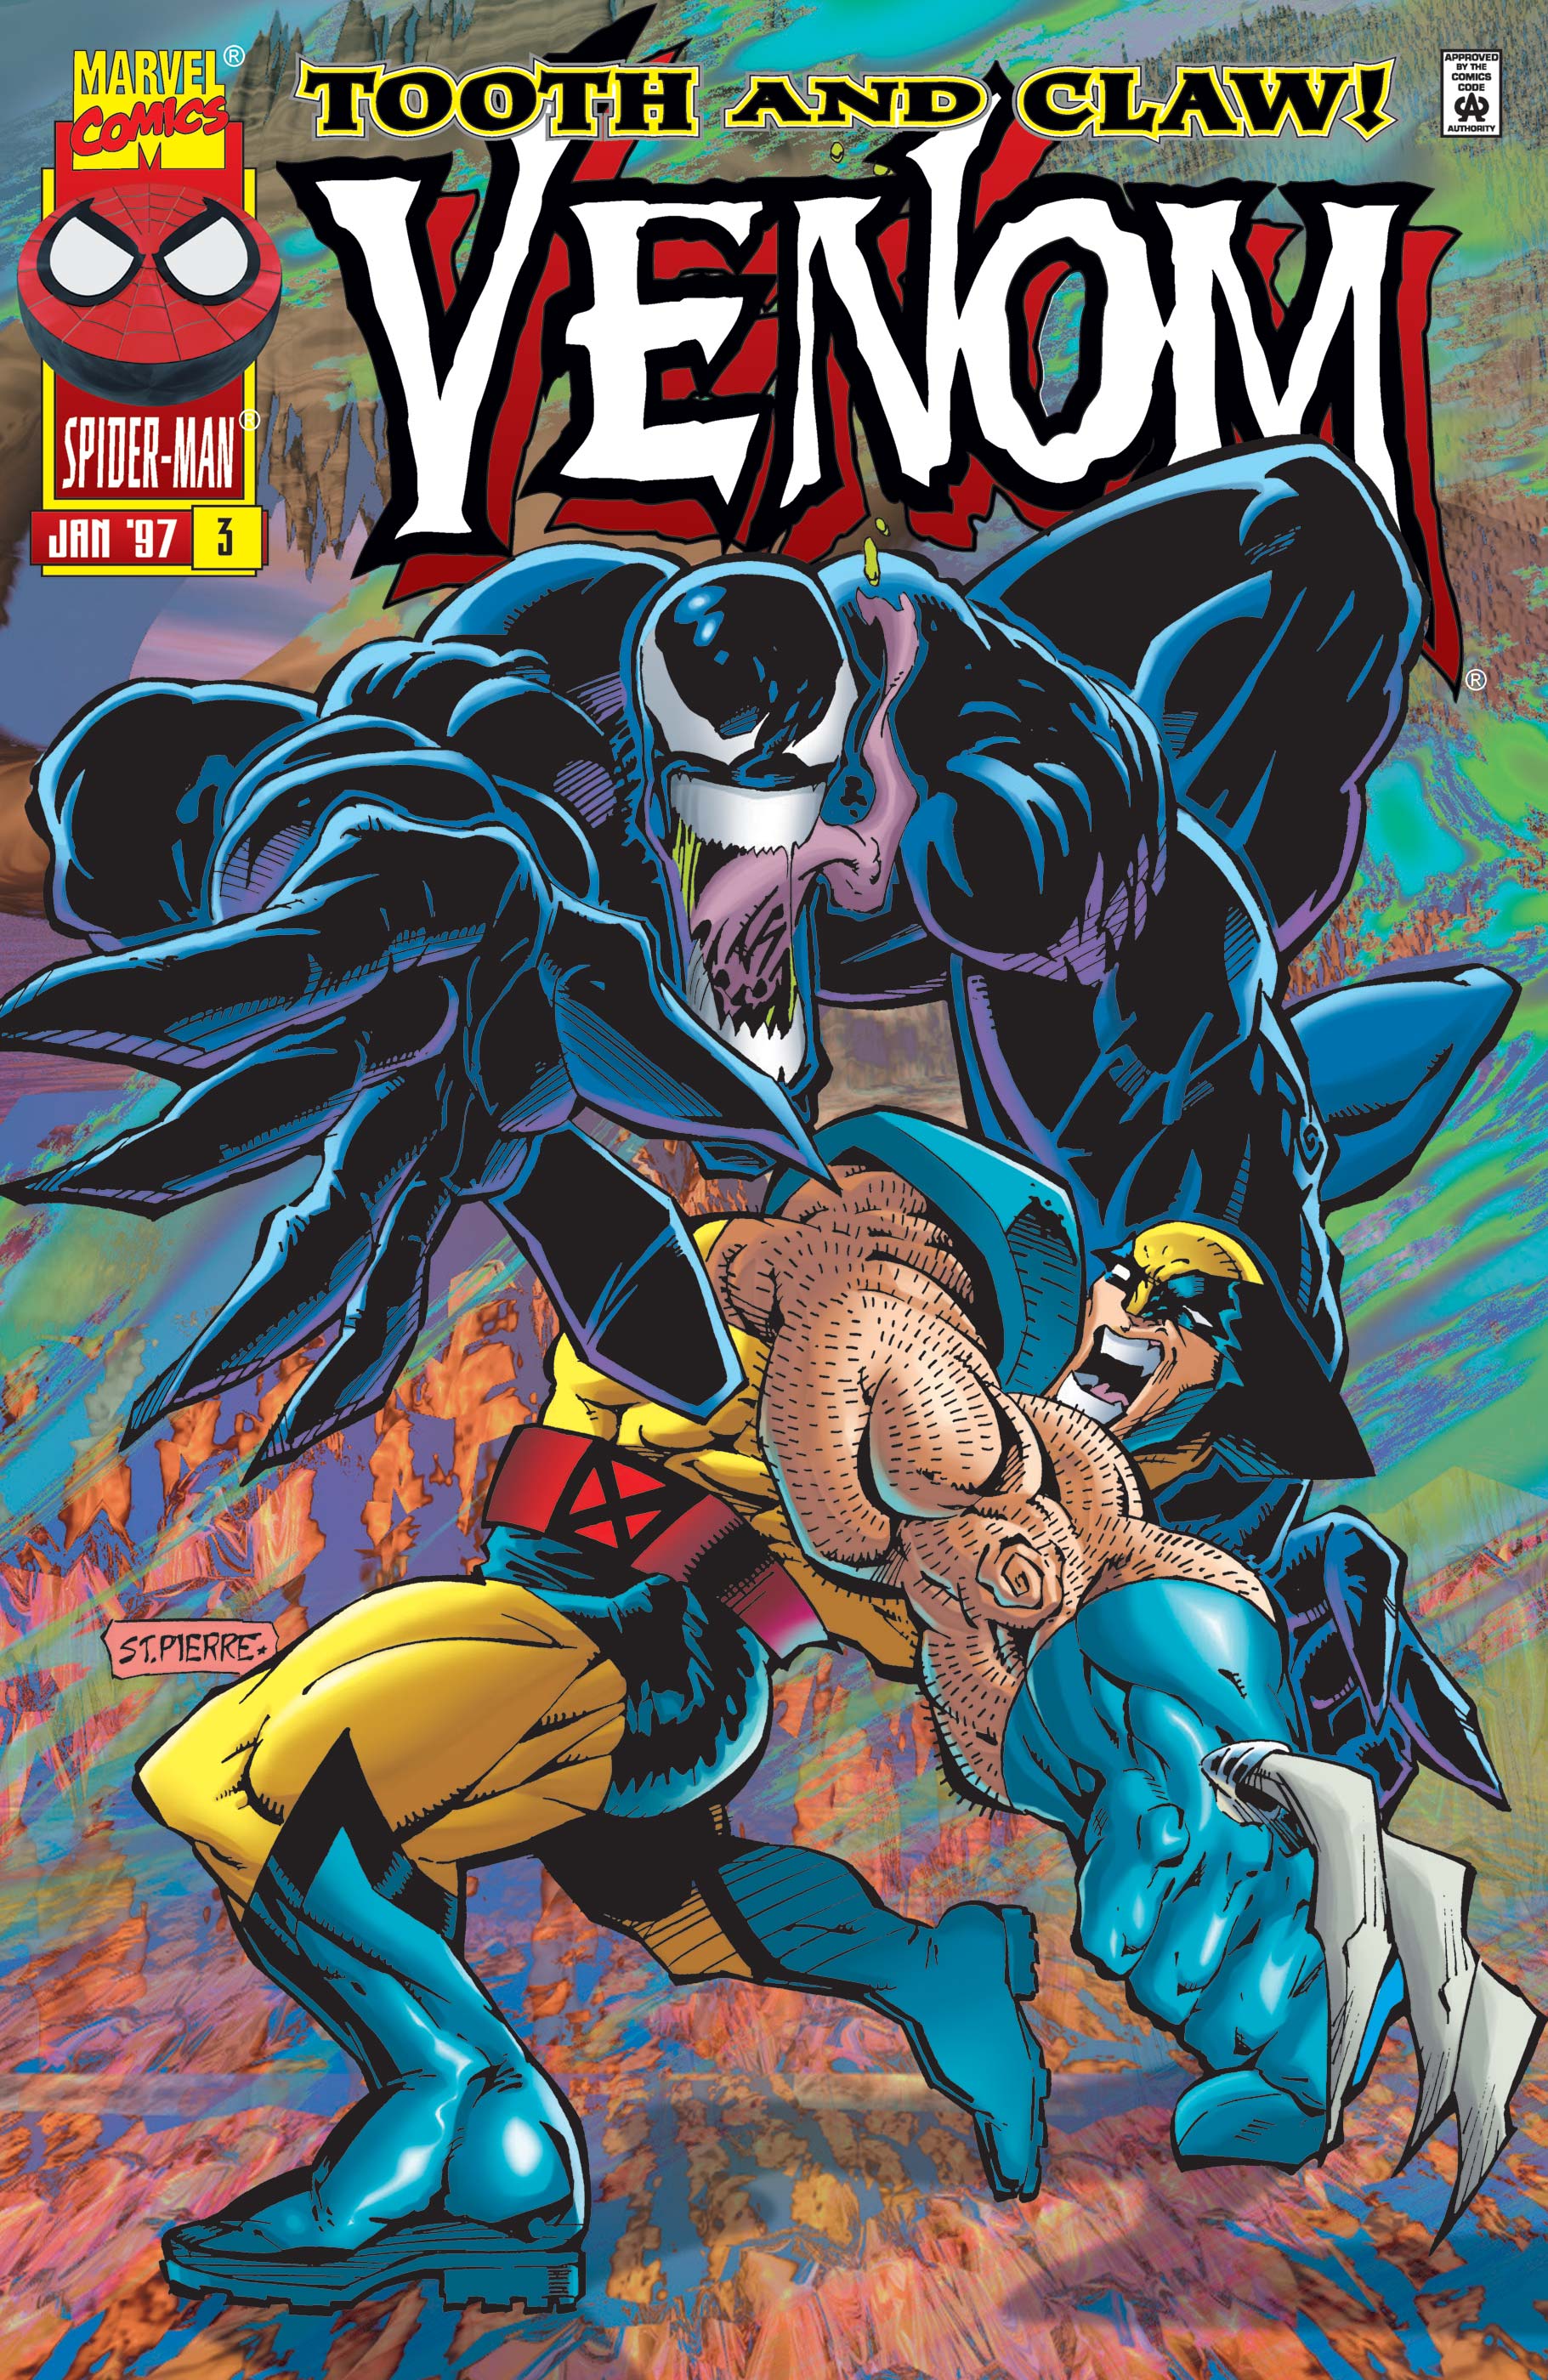 Venom: Tooth and Claw (1996) #3